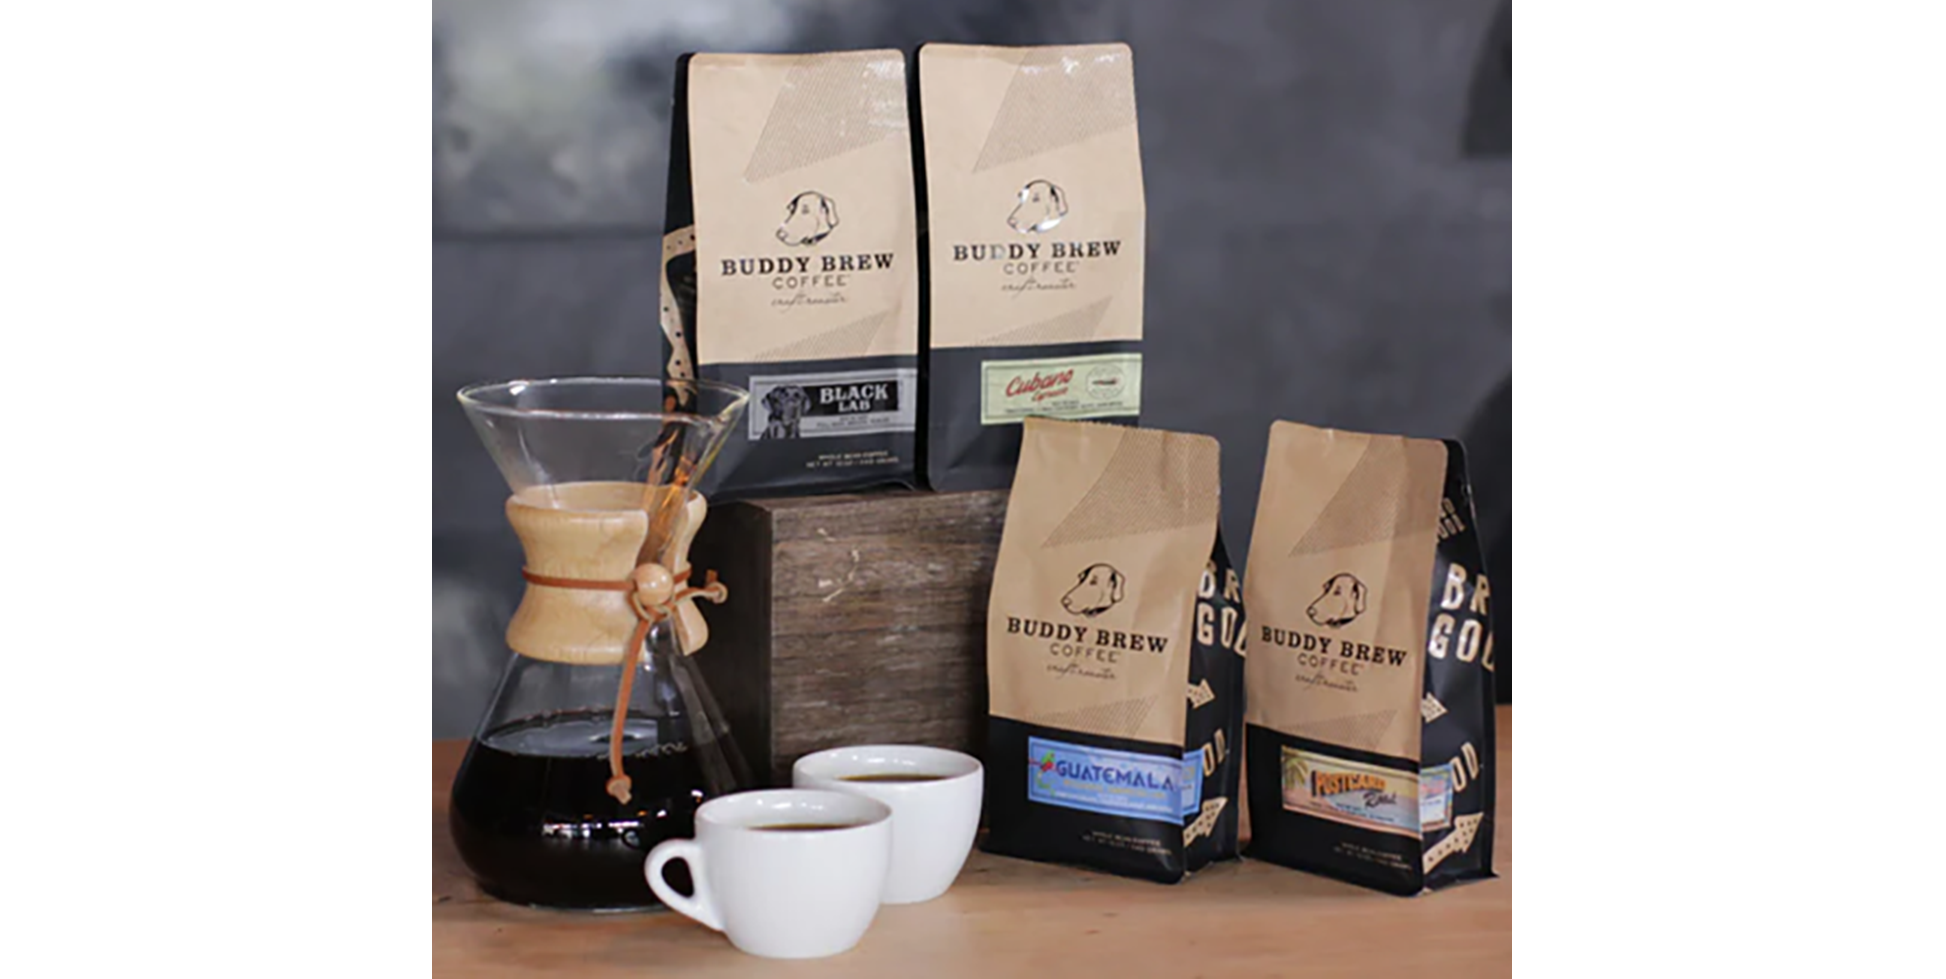 Buddy Brew Coffee wins distribution deal with The Fresh Market